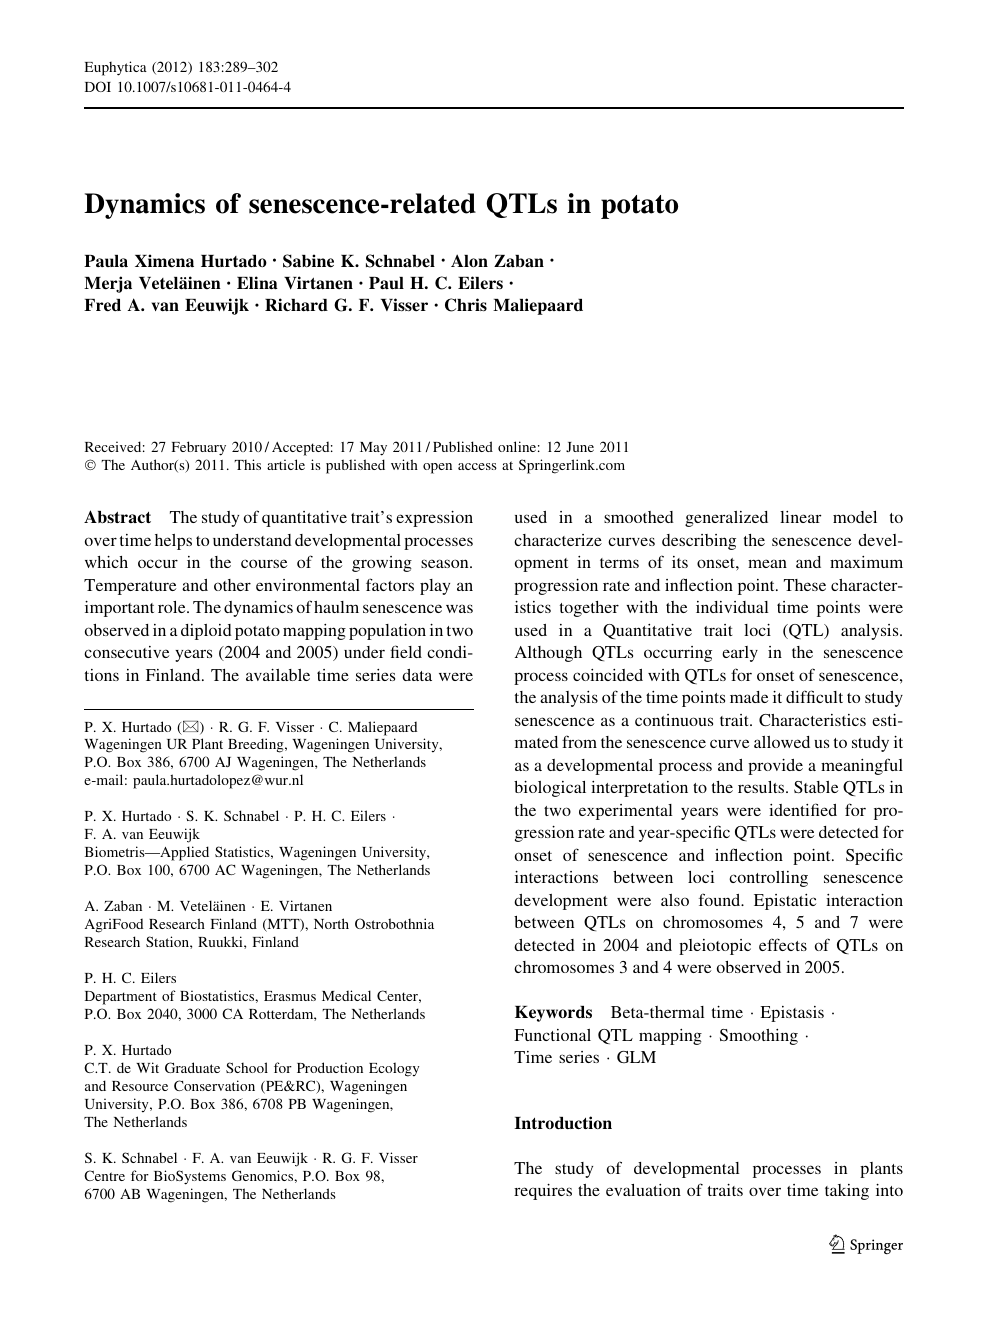 Dynamics Of Senescence Related Qtls In Potato Topic Of Research Paper In Biological Sciences Download Scholarly Article Pdf And Read For Free On Cyberleninka Open Science Hub